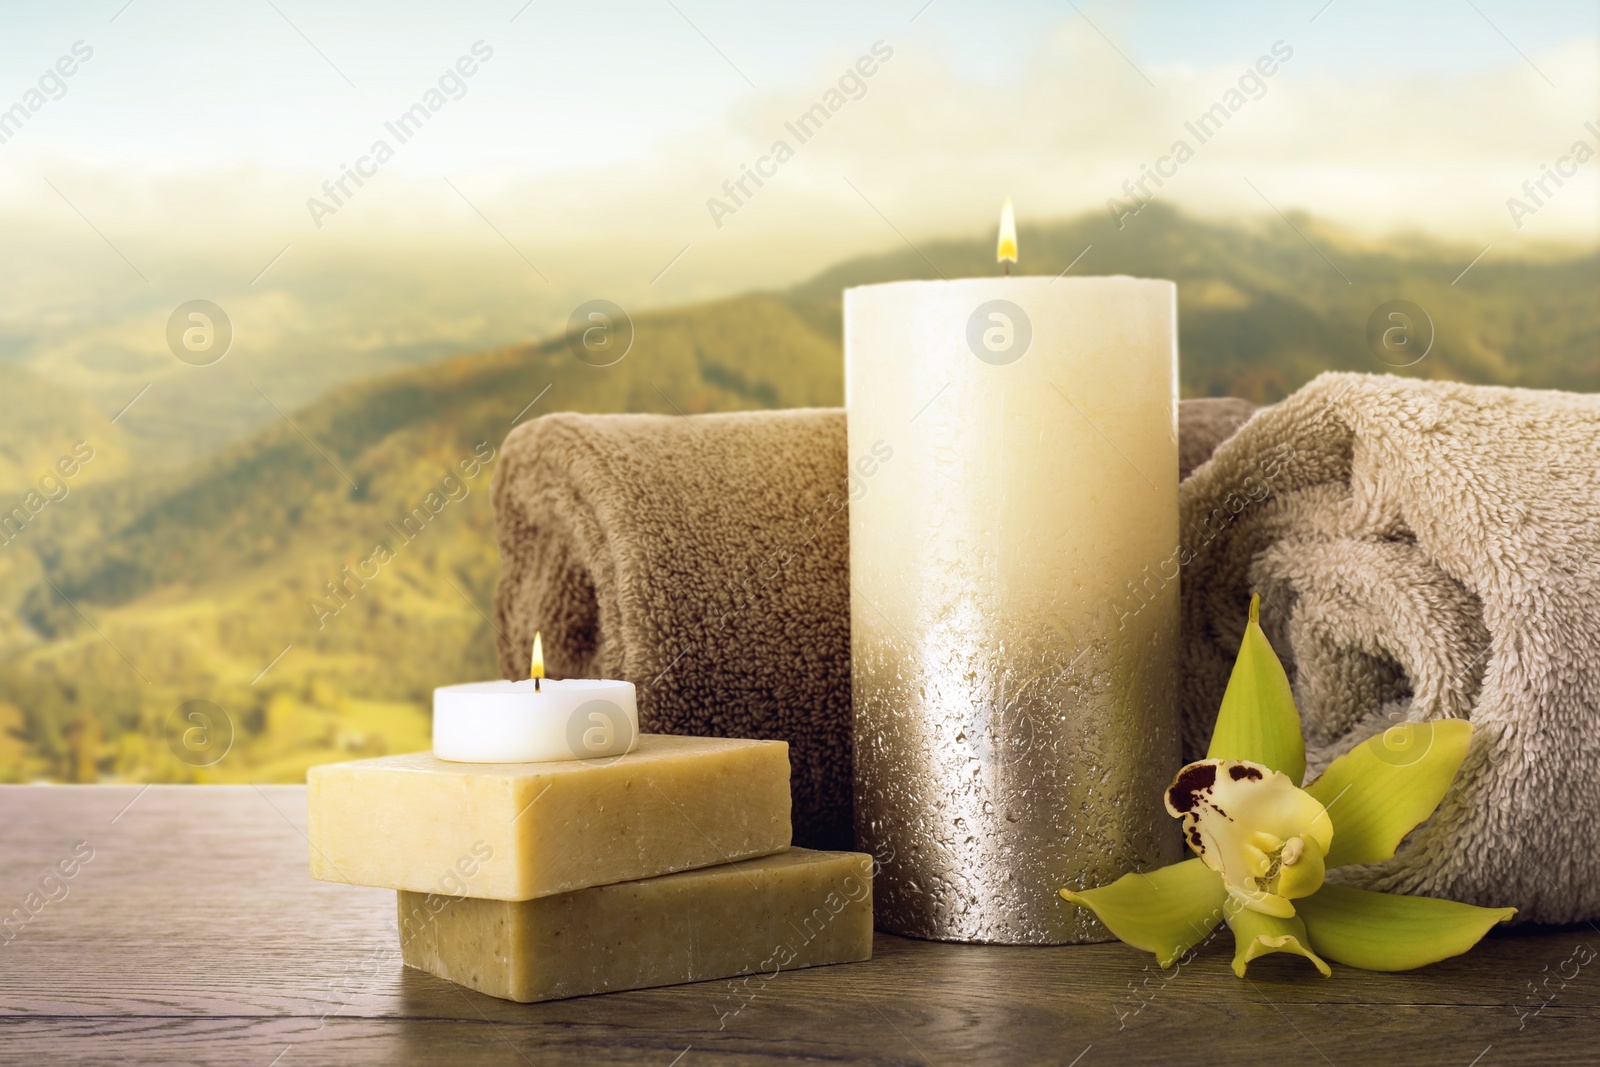 Image of Spa holiday. Composition with towels, candle and soap bars on wooden table against beautiful mountain landscape